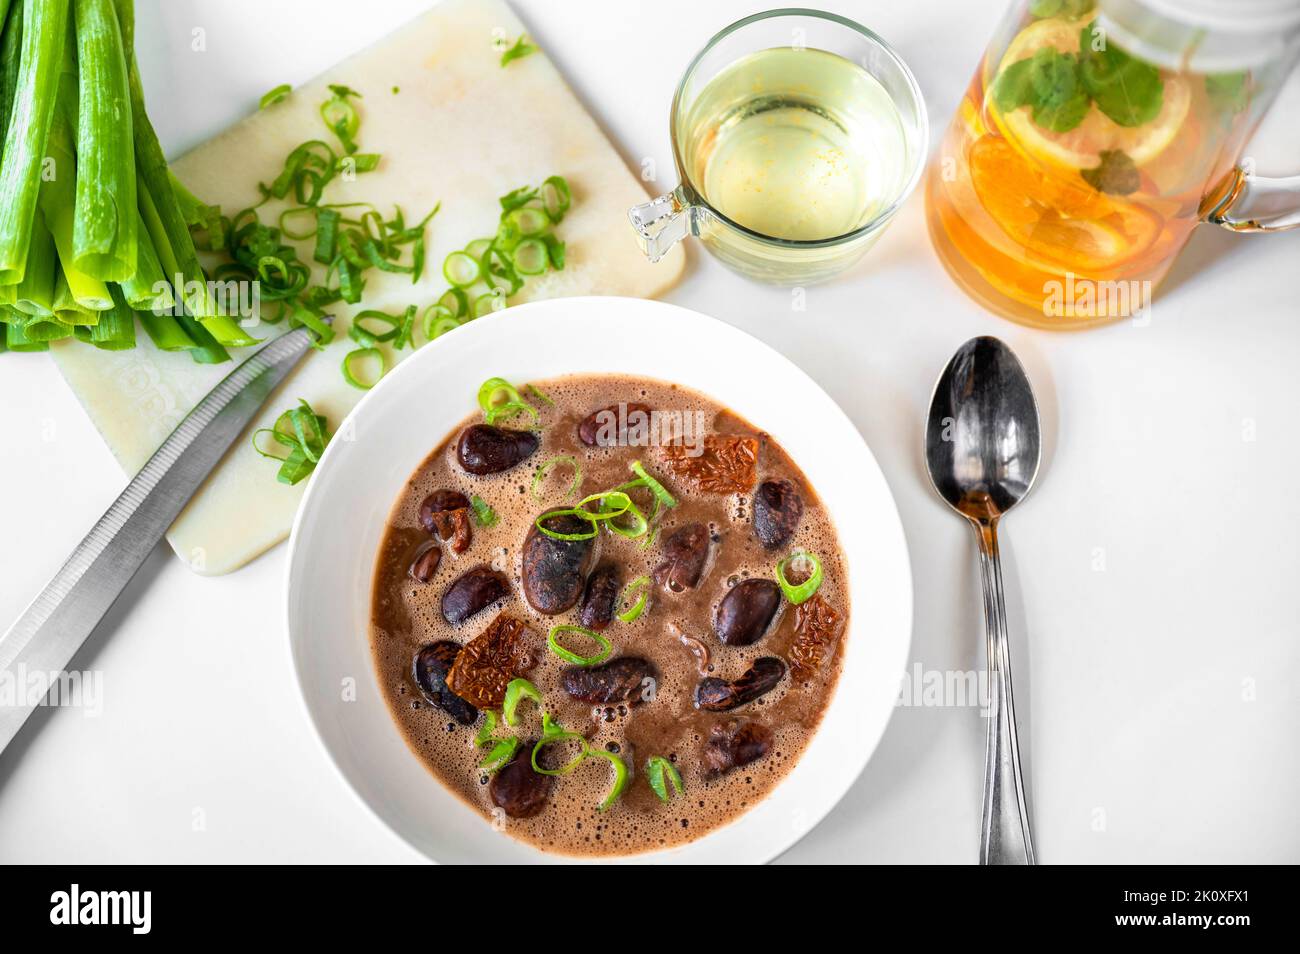 Giant bean soup with dried tomato in plate, sliced green onion shoot on kitchen board, orange fruit beverage, spoon and knife on white background. Stock Photo